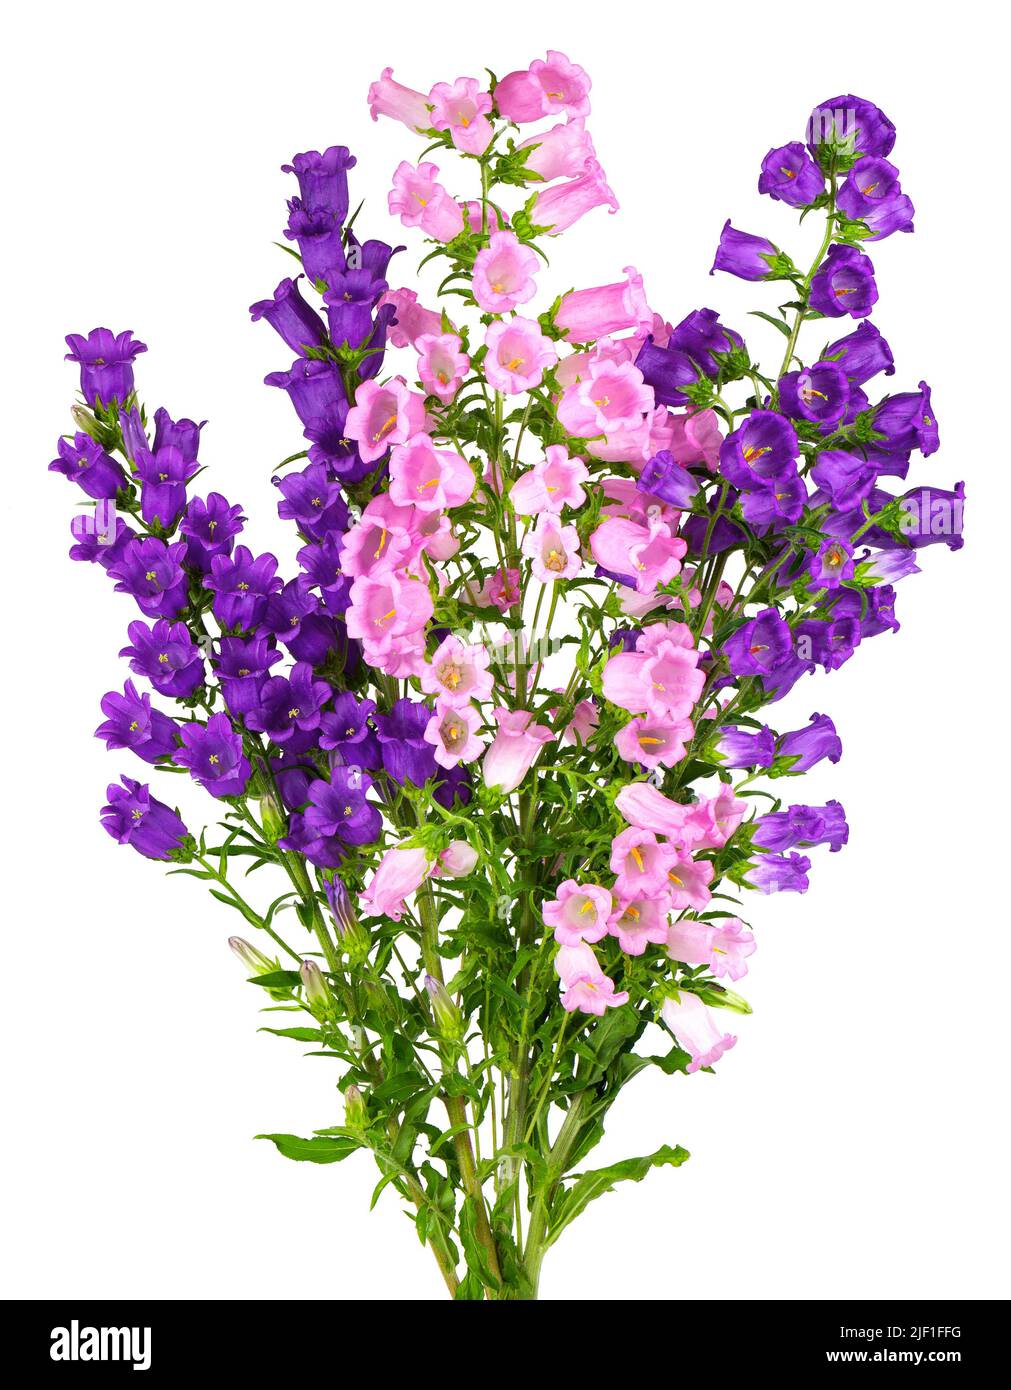 Campanula medium flowers isolated on white background. Bouquet of Canterbury bells or bell flower Stock Photo